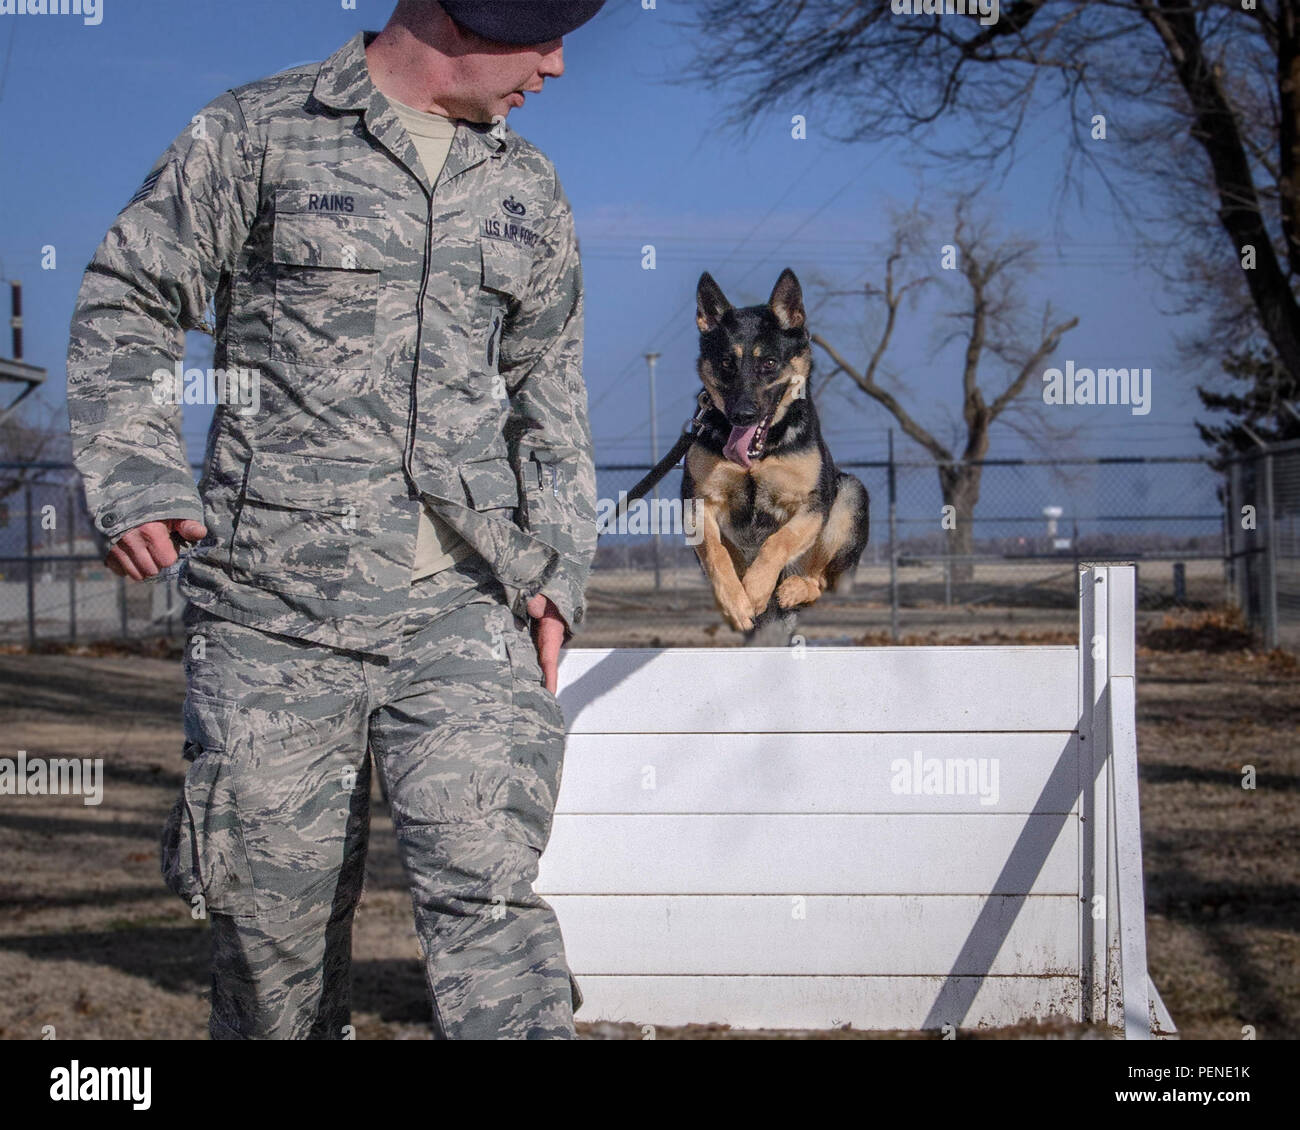 71st Security Forces Squadron MWD Rea gets loose on the kennel section obstacle course at Vance Air Force Base, Oklahoma, Jan. 11. Obstacle work helps teach MWDs obedience and how to handle real-world obstacles in austere locations. Rea was one of two Vance MWDs that were a part of Pope Francis' security detail during his 2015 U.S. visit. (U.S. Air Force photo/David Poe) Stock Photo